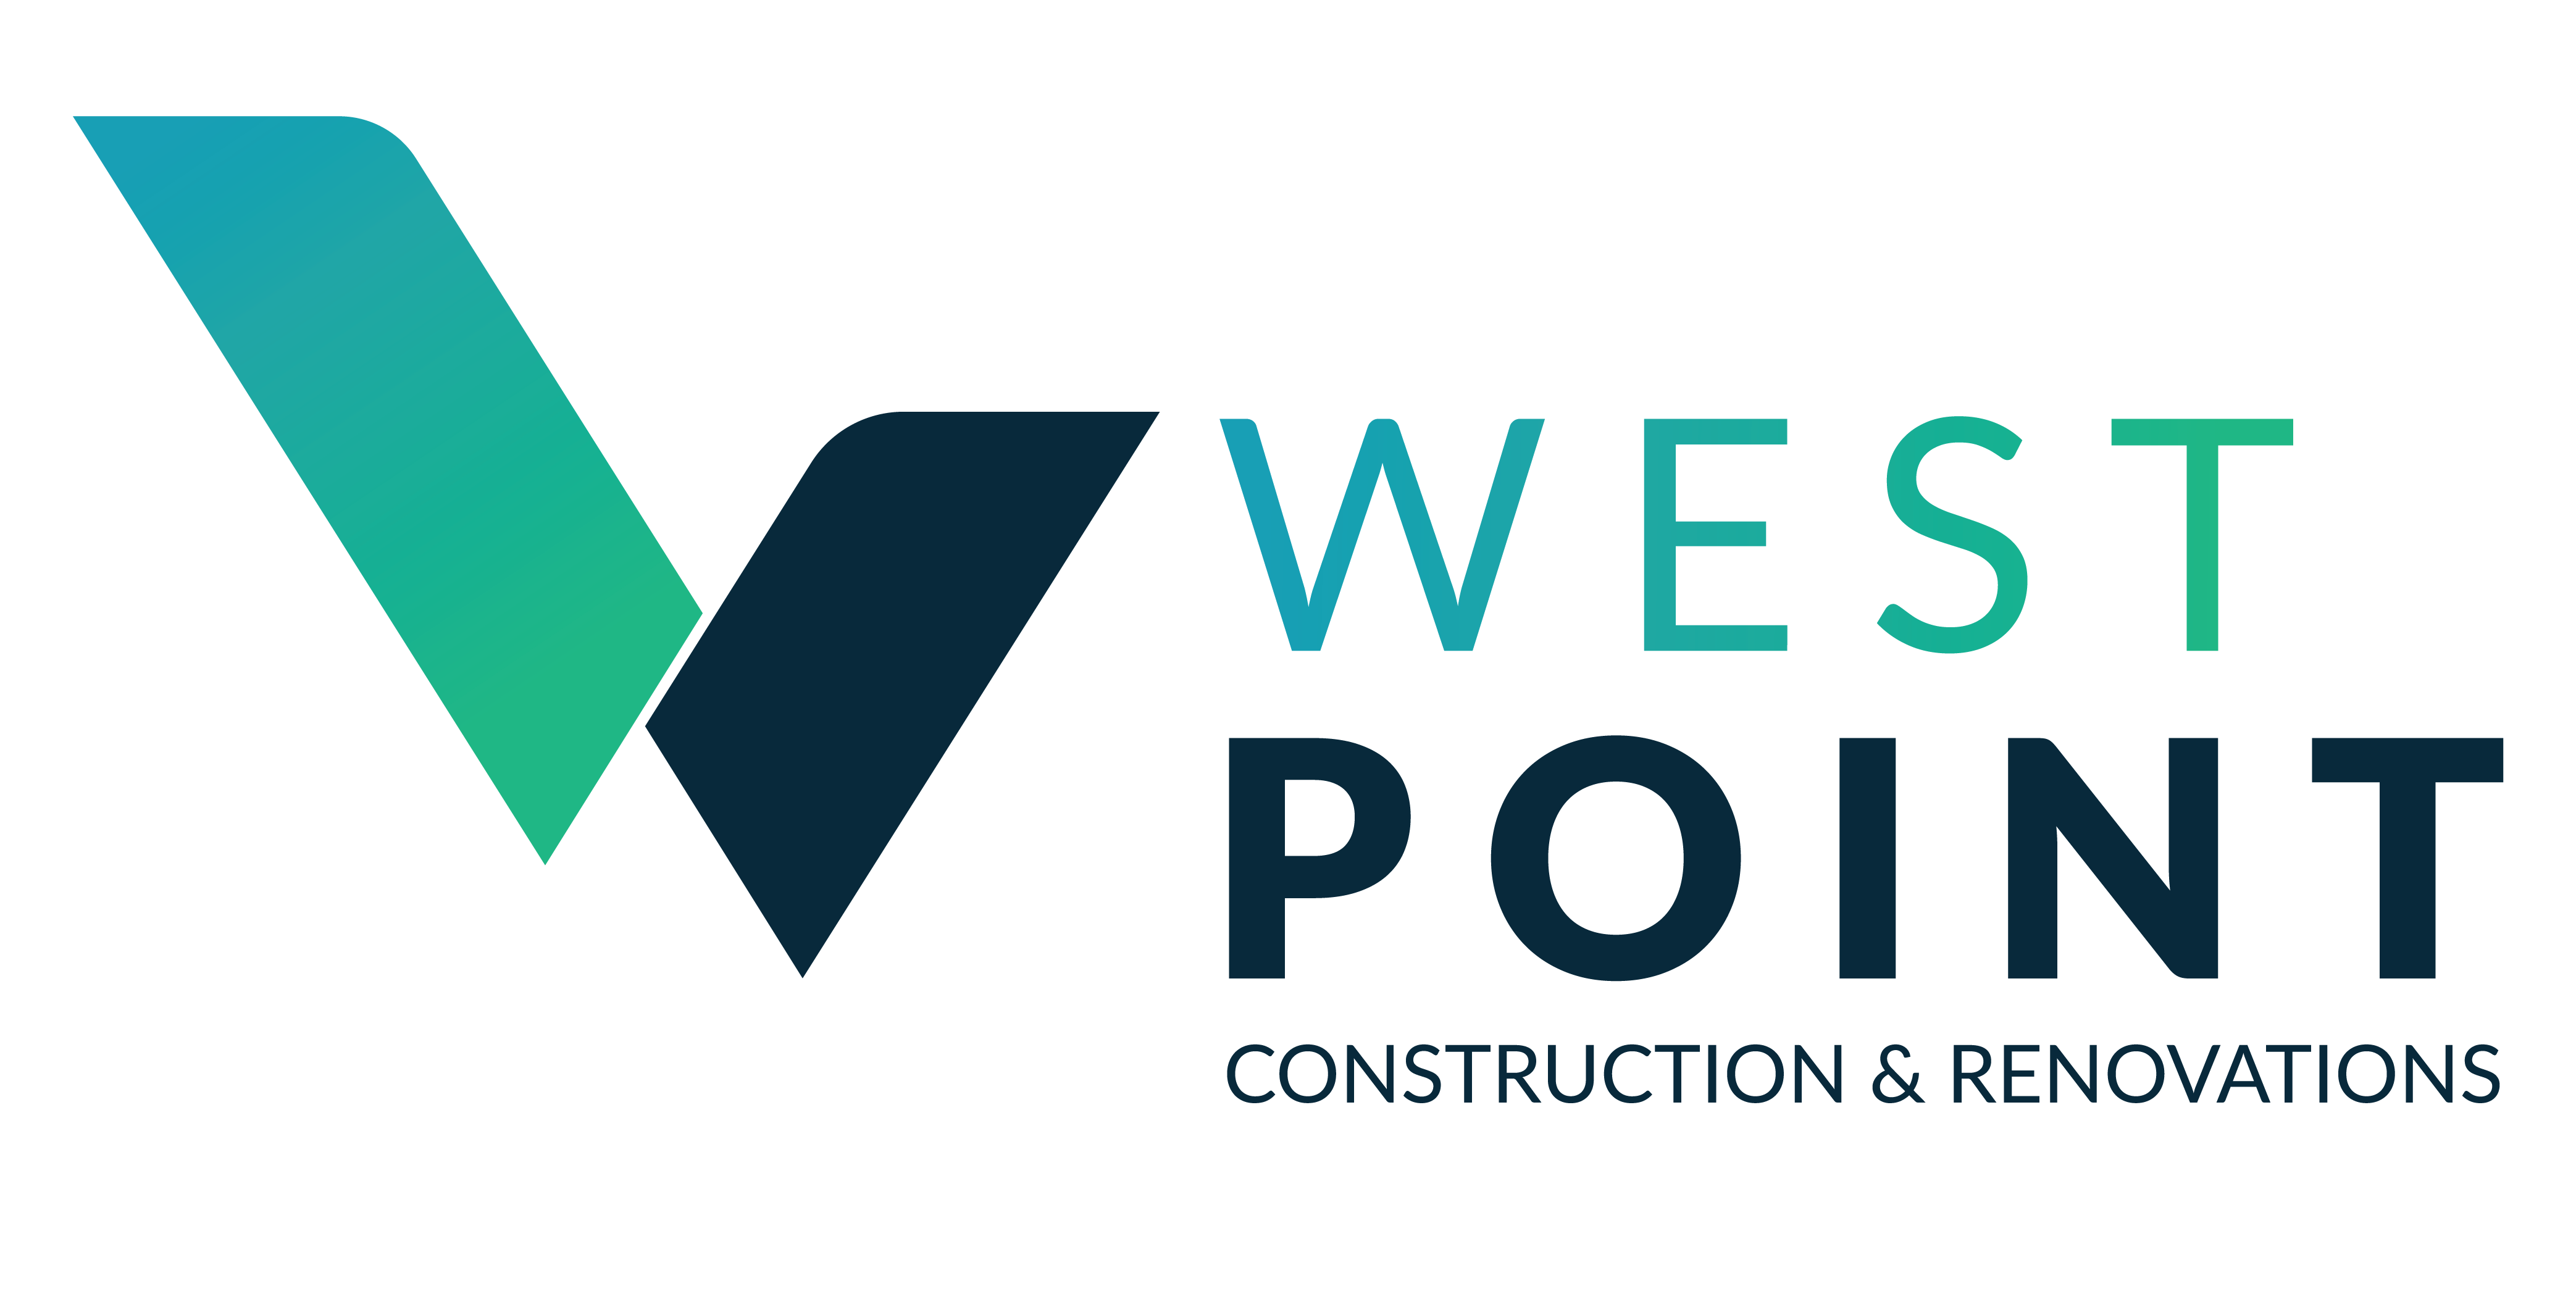 About West Point Construction